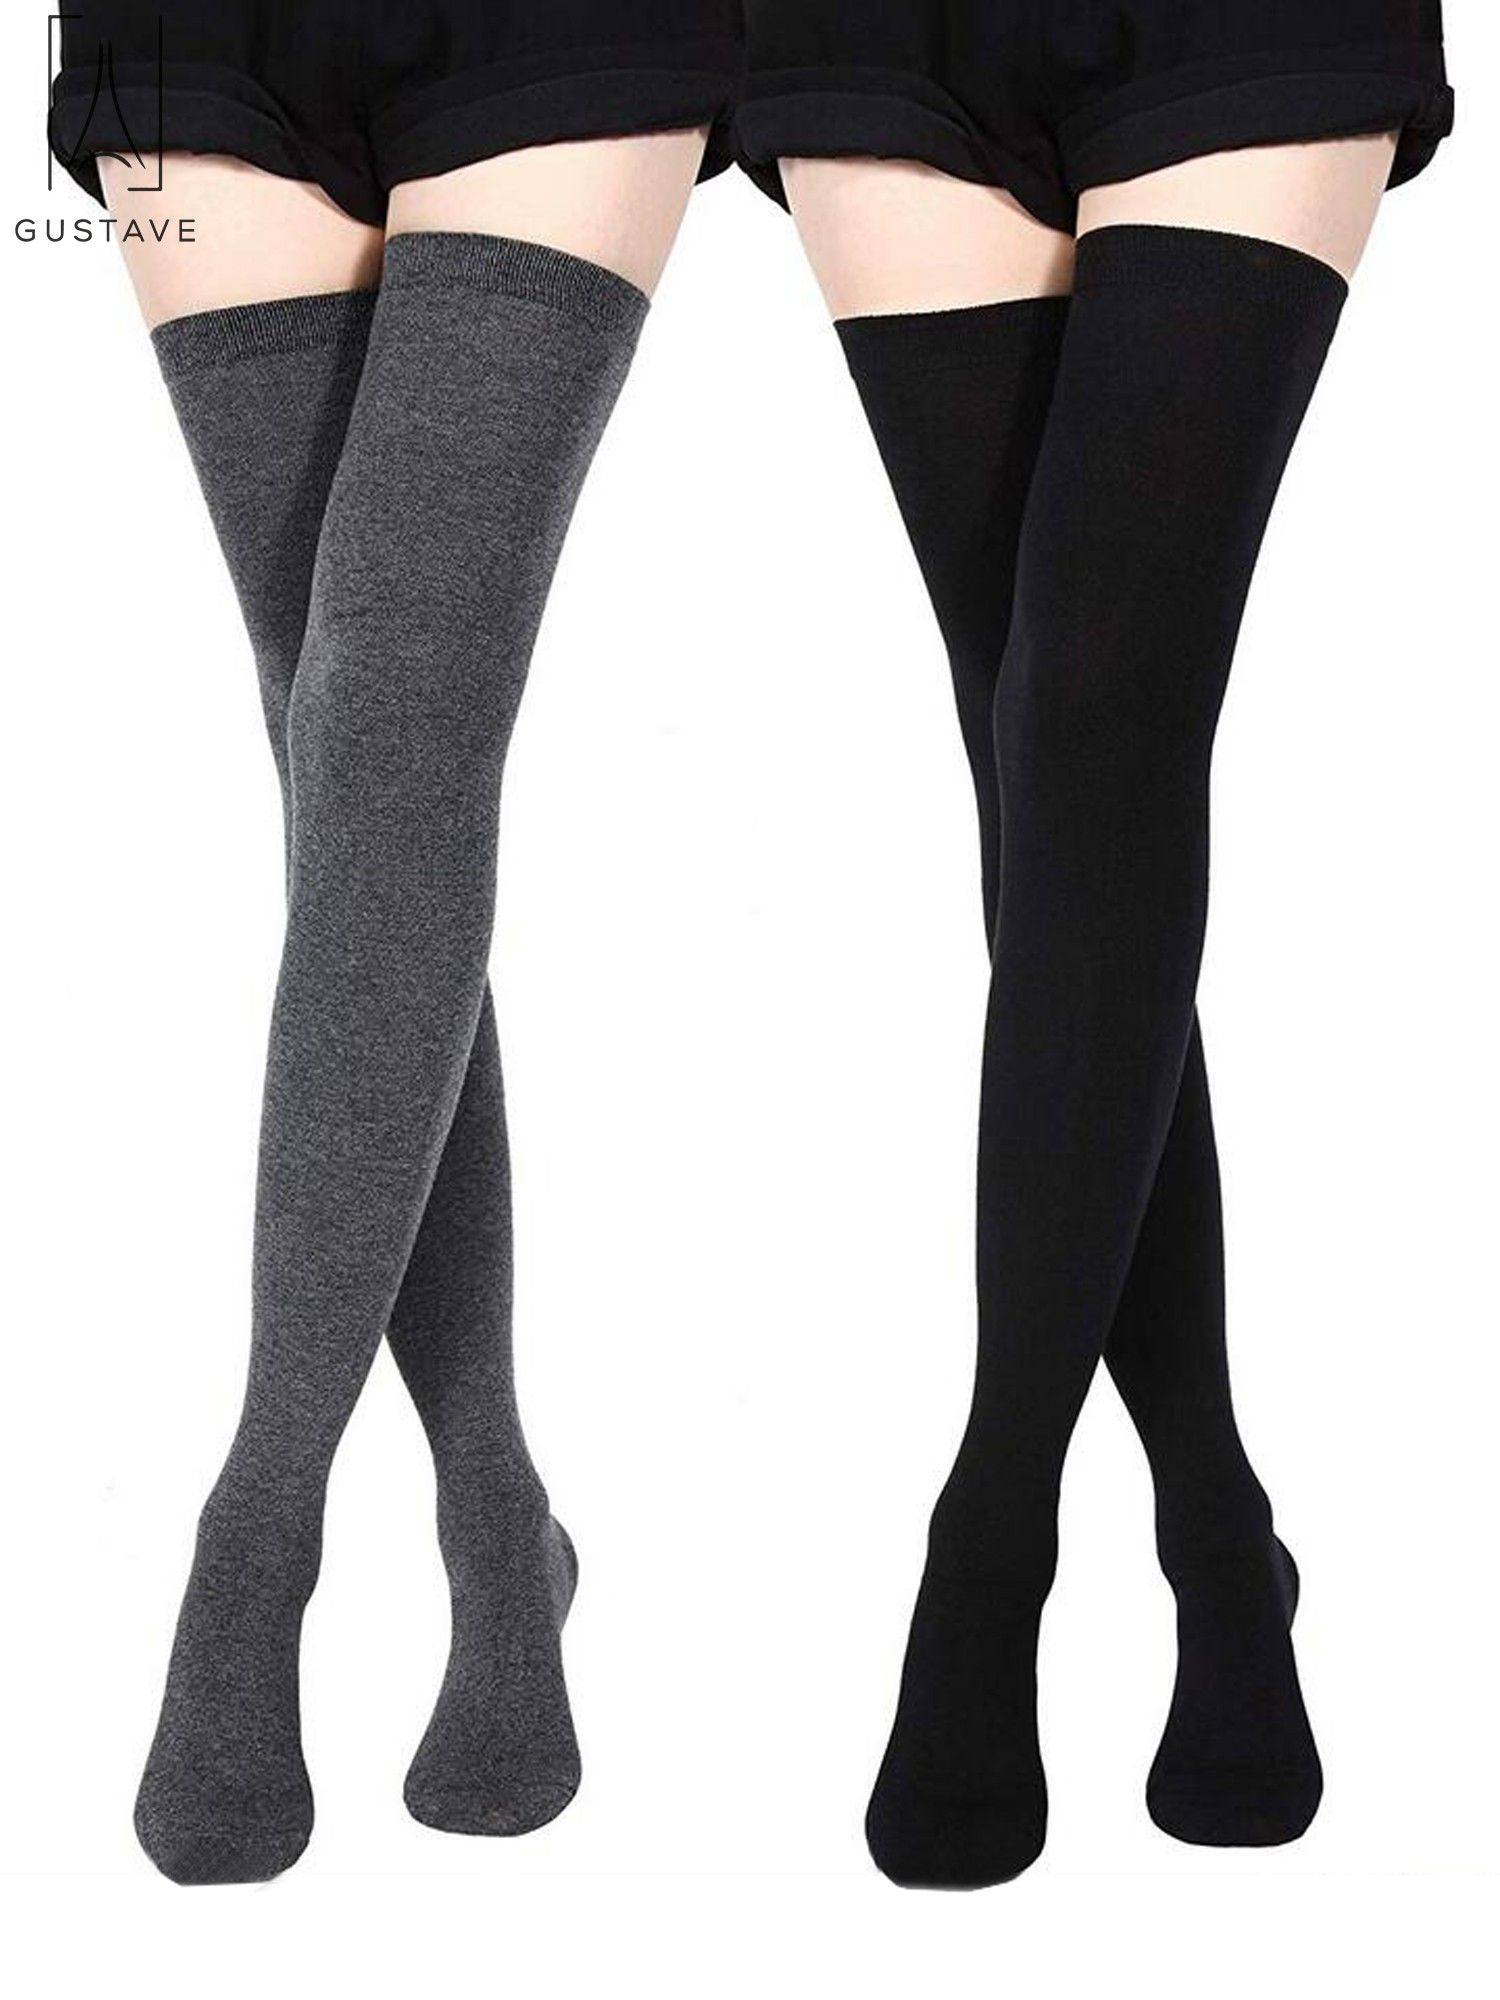 Gustave 2 Paris Women Girl Extra Long Fashion Thigh High Socks over the Knee High Boot Stockings Leg Warmers Lady Party Dress "Gray, 2 Pair" - image 1 of 10